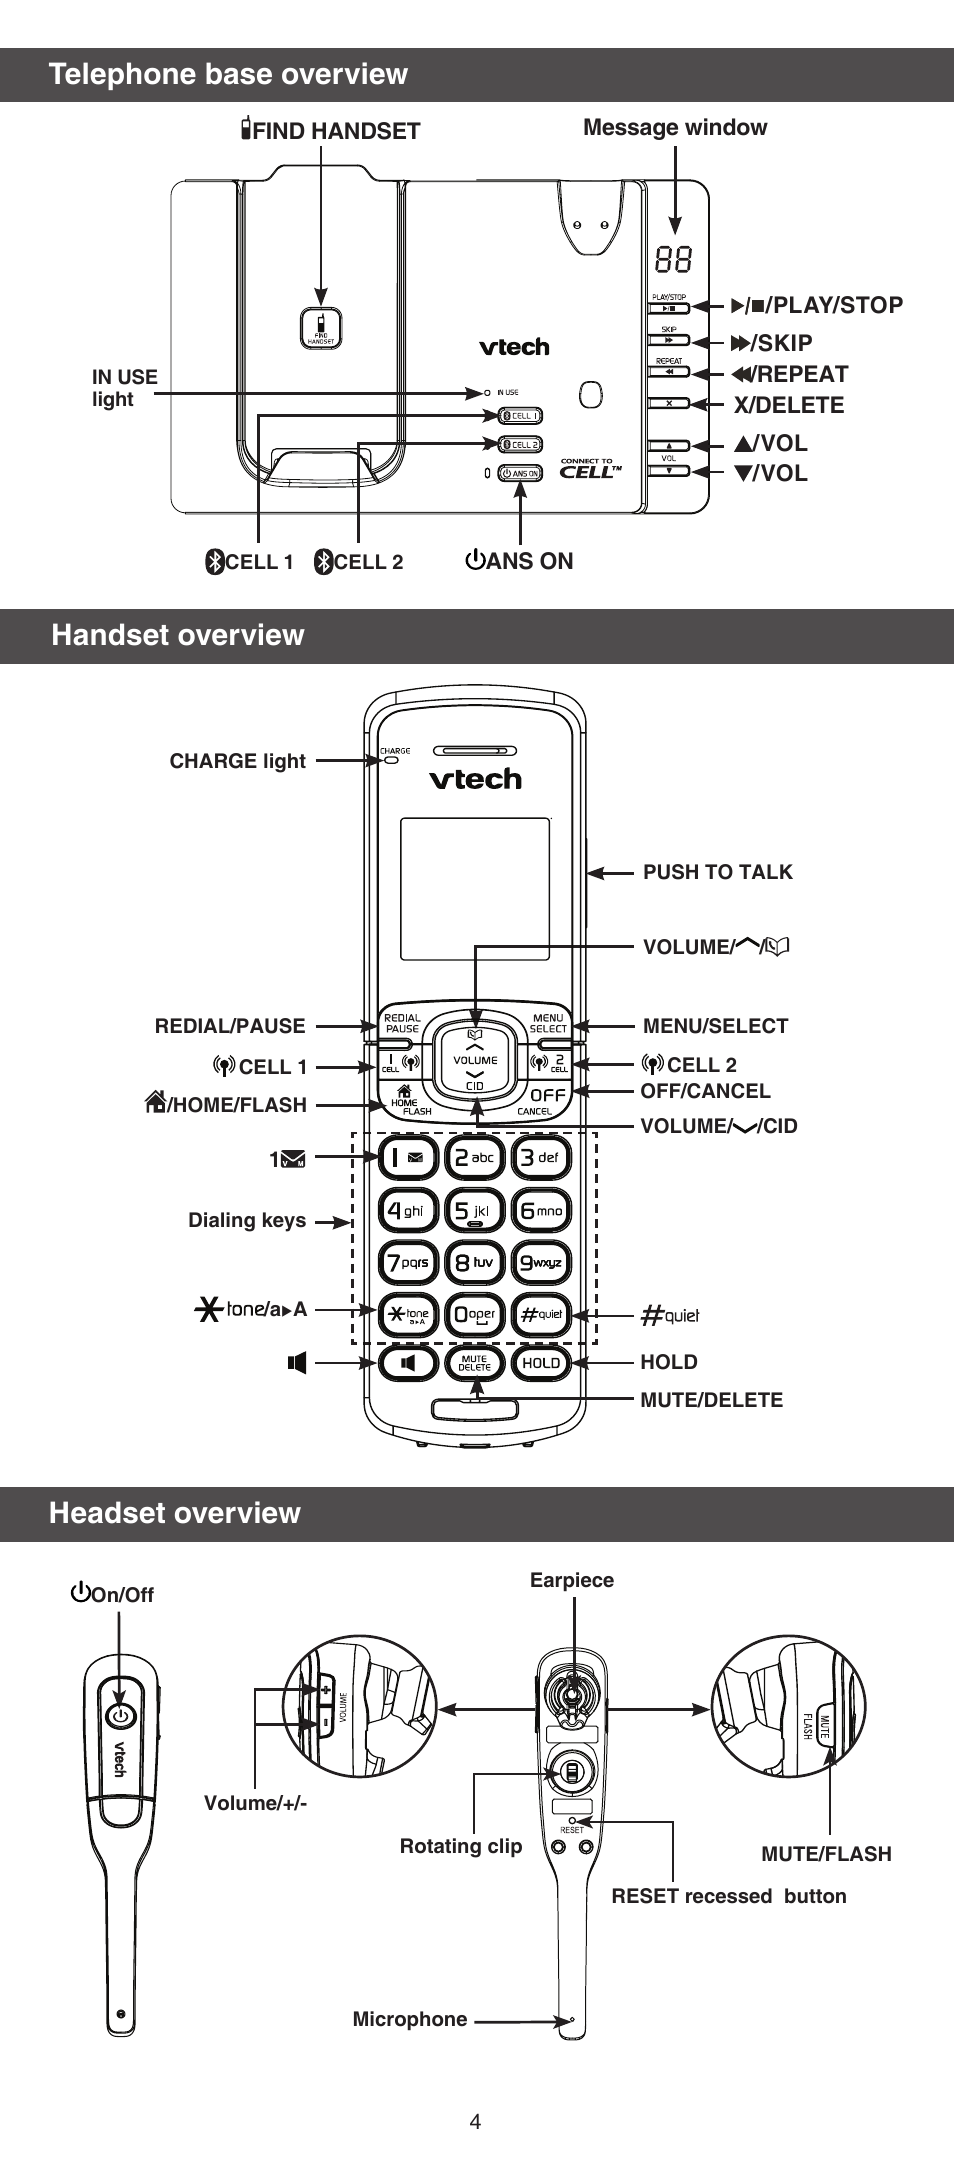 Telephone base overview, Handset overview, Headset overview | VTech